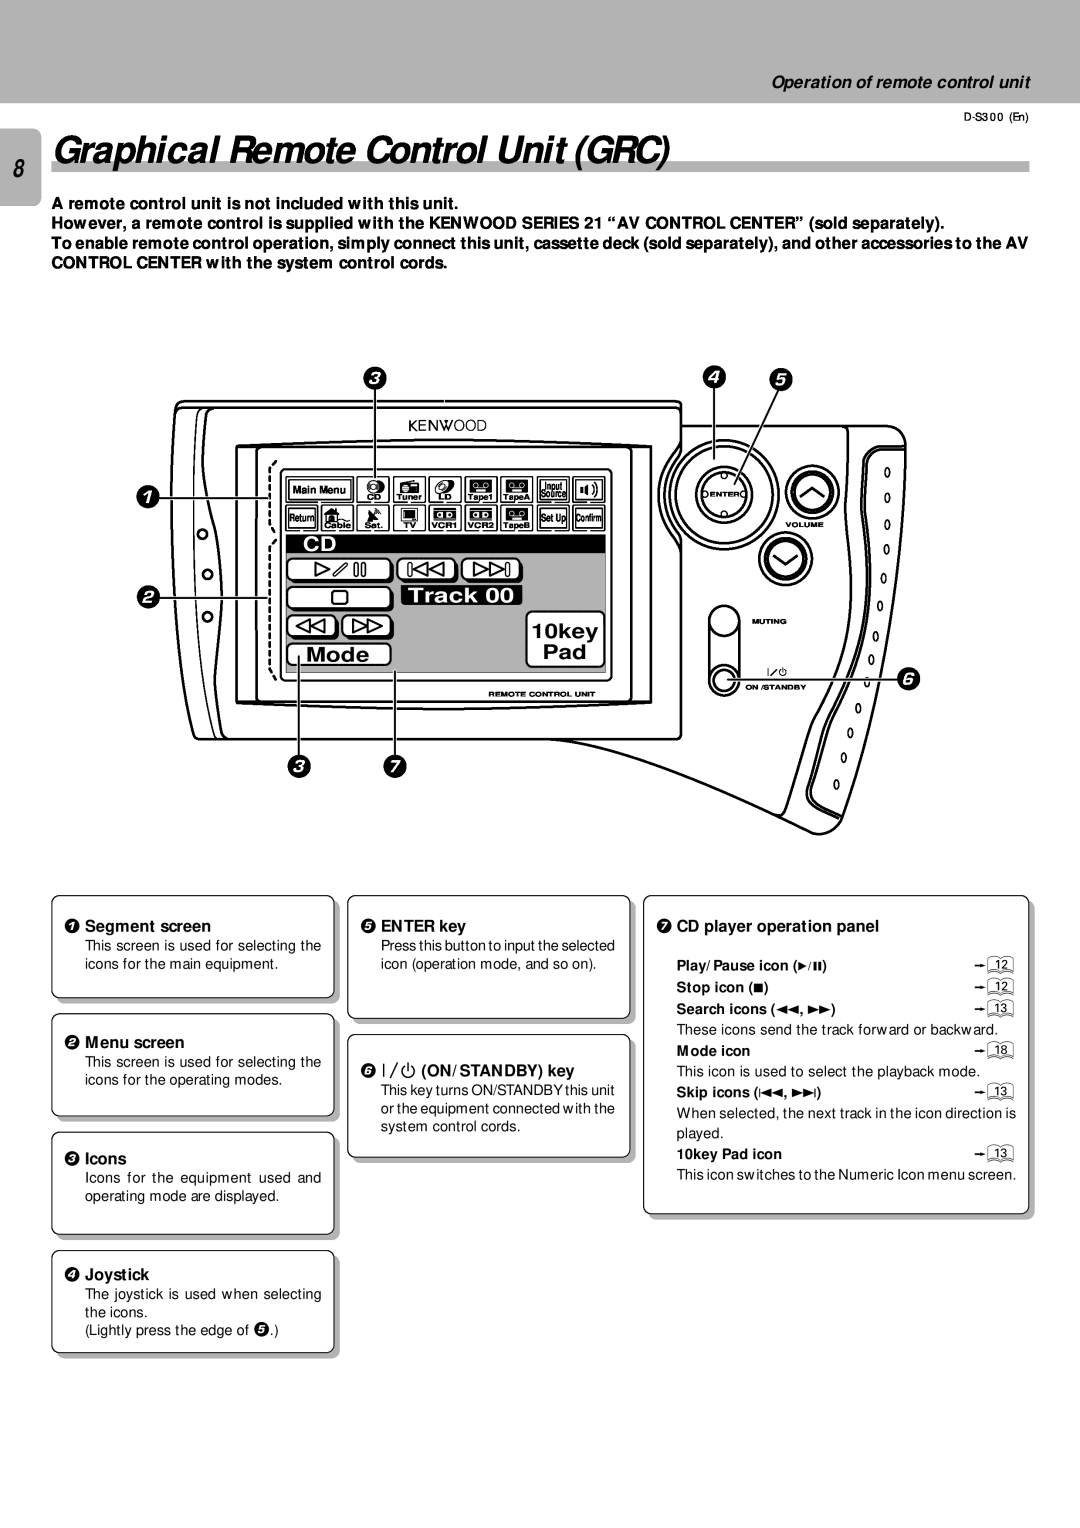 Kenwood D-S300 instruction manual 8Graphical Remote Control Unit GRC, Operation of remote control unit, Track, 10key, Mode 